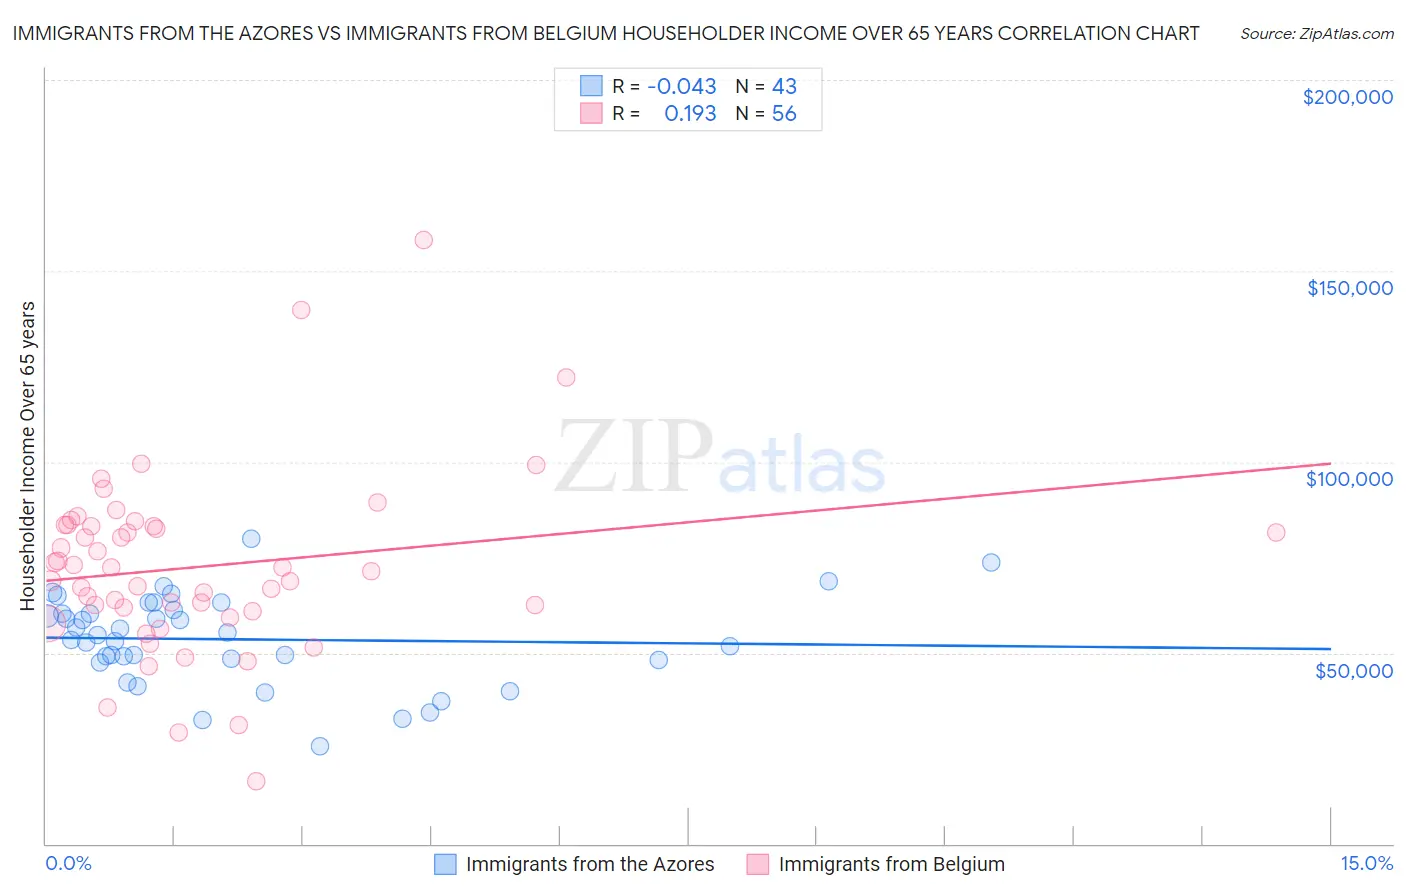 Immigrants from the Azores vs Immigrants from Belgium Householder Income Over 65 years